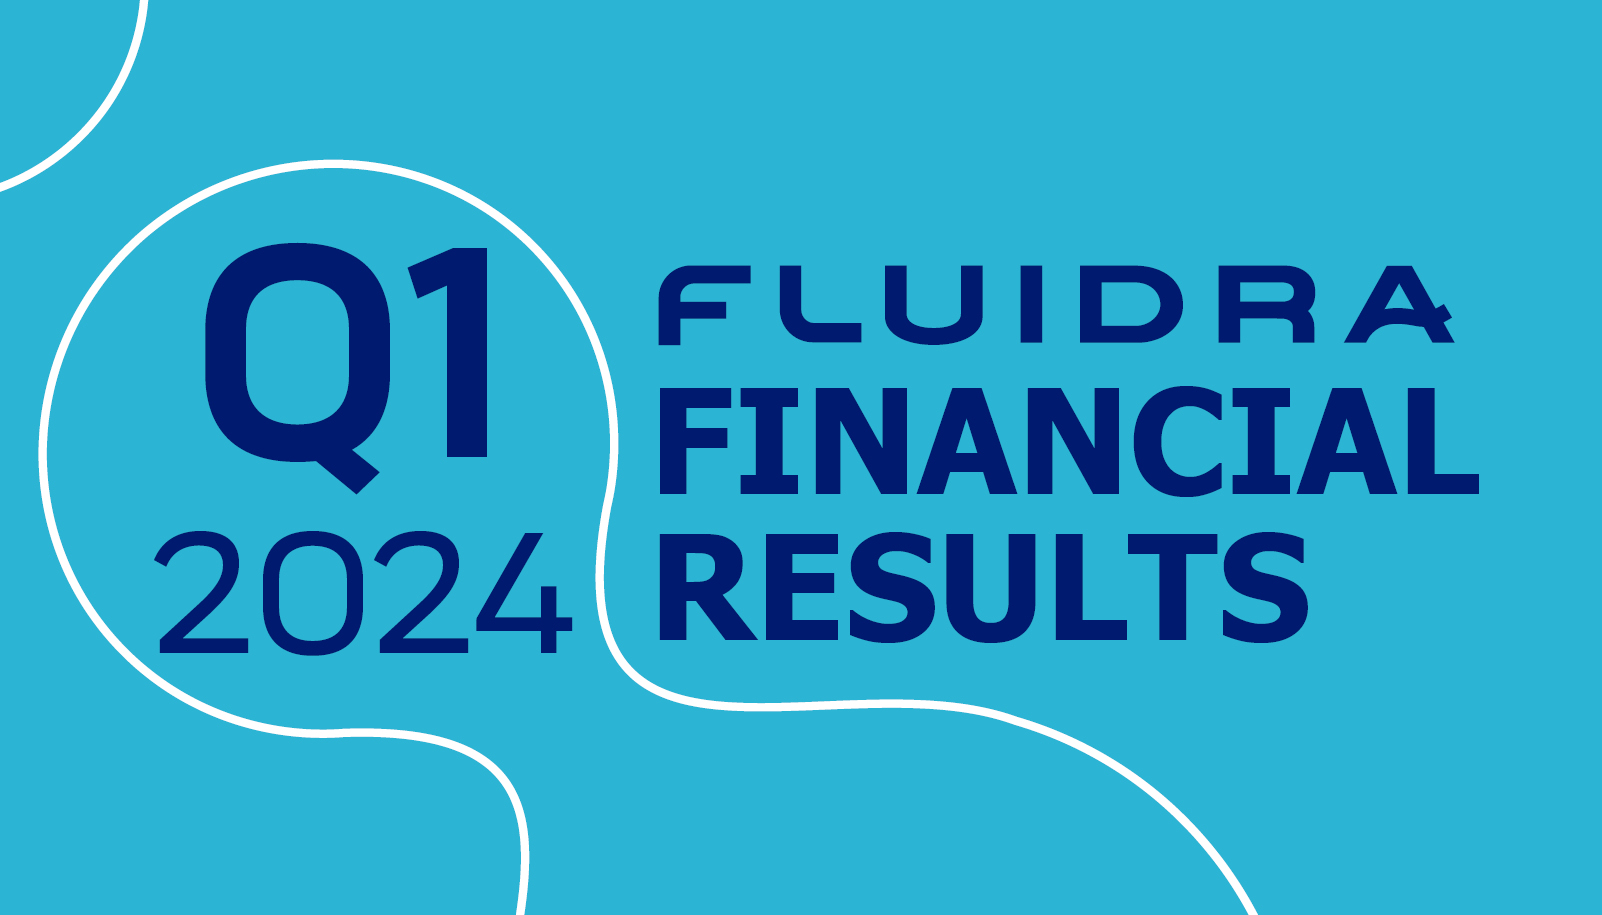 Fluidra achieves sales of €527 million and EBITDA of € 118 million in the first quarter